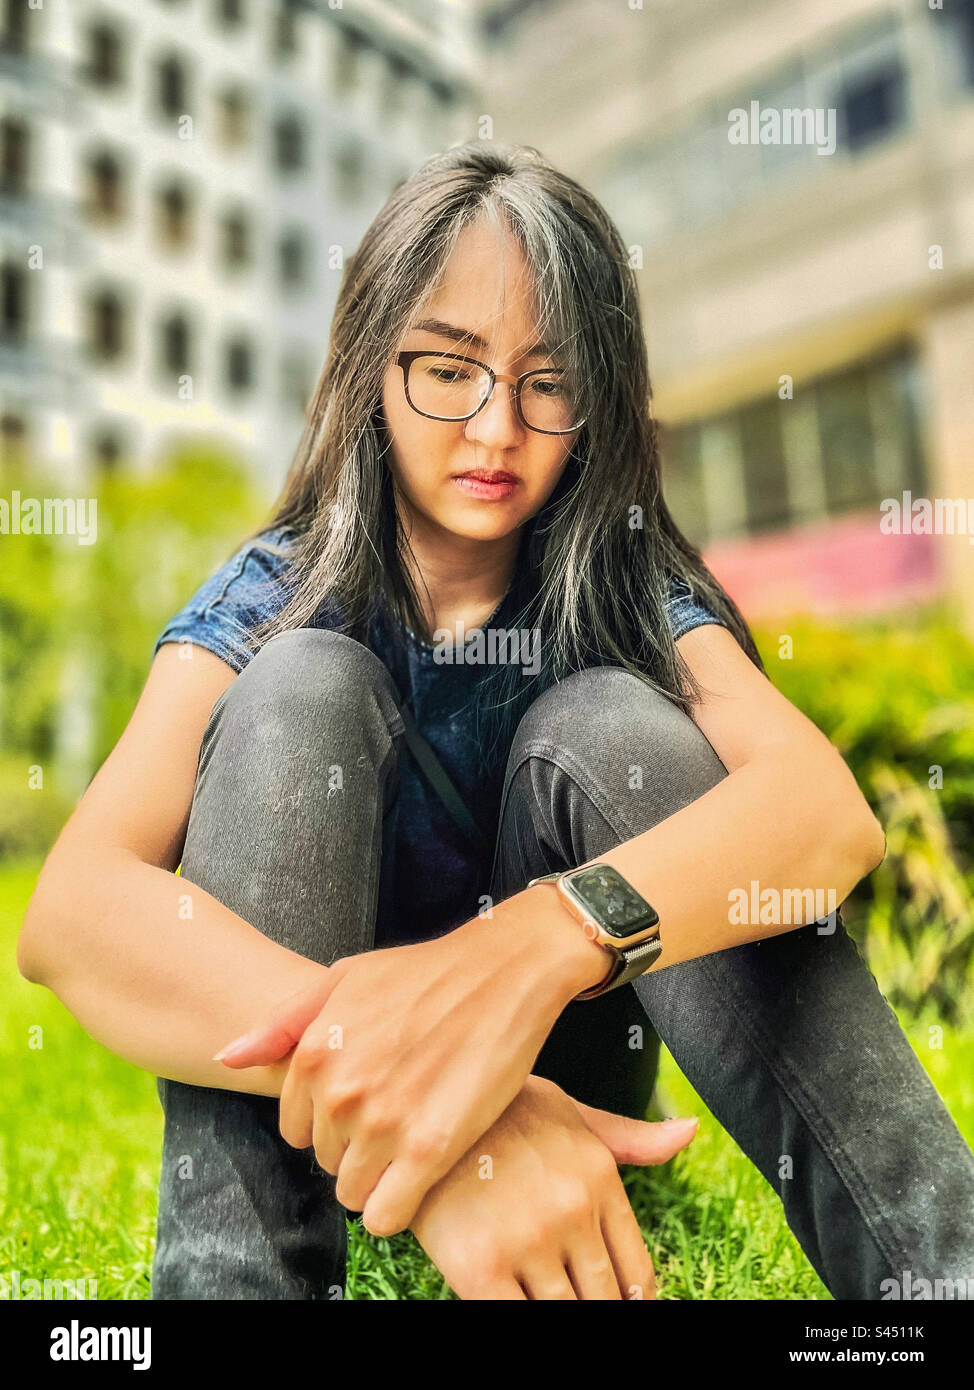 Emo girl. Portrait of young, long haired woman sitting on the grass with arms around her knees. Focus on foreground. Stock Photo